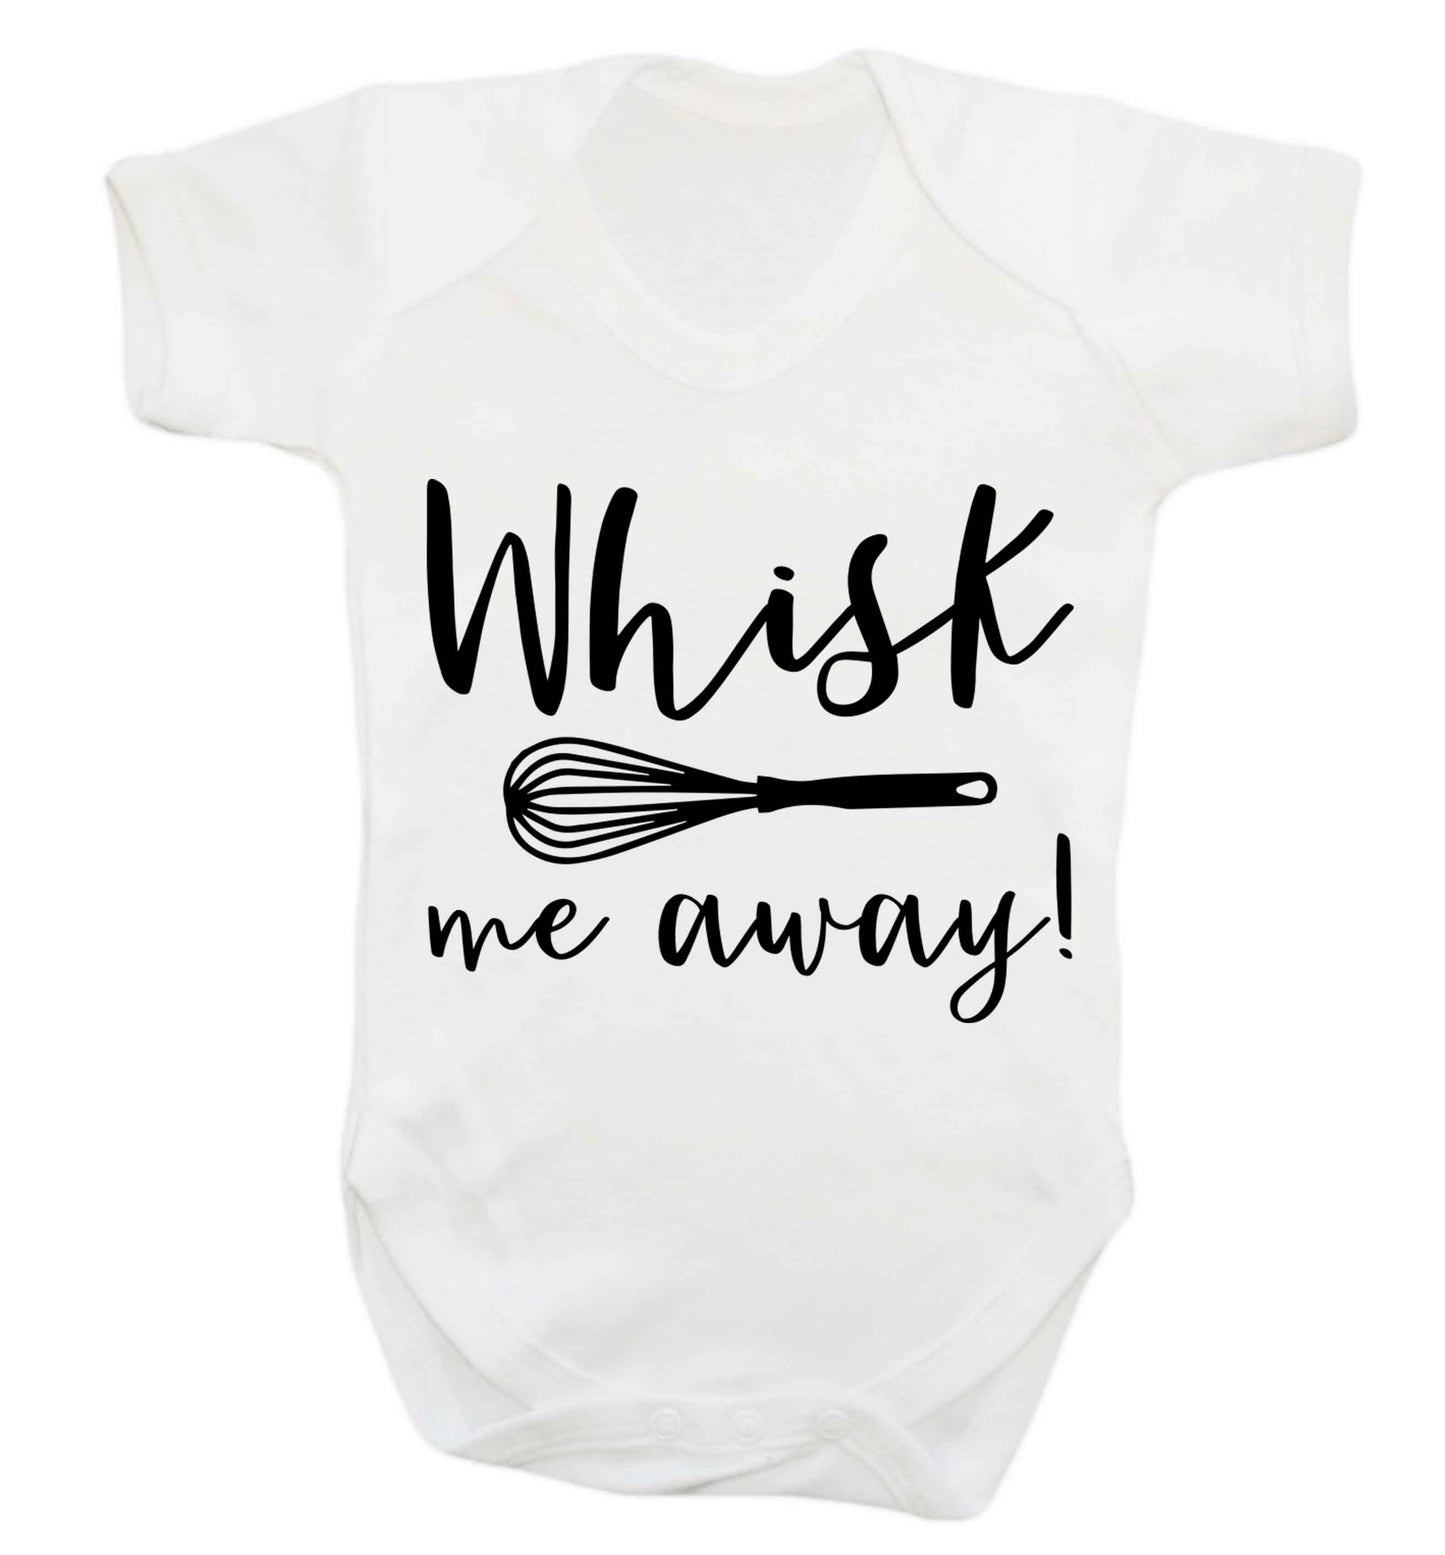 Whisk me away Baby Vest white 18-24 months